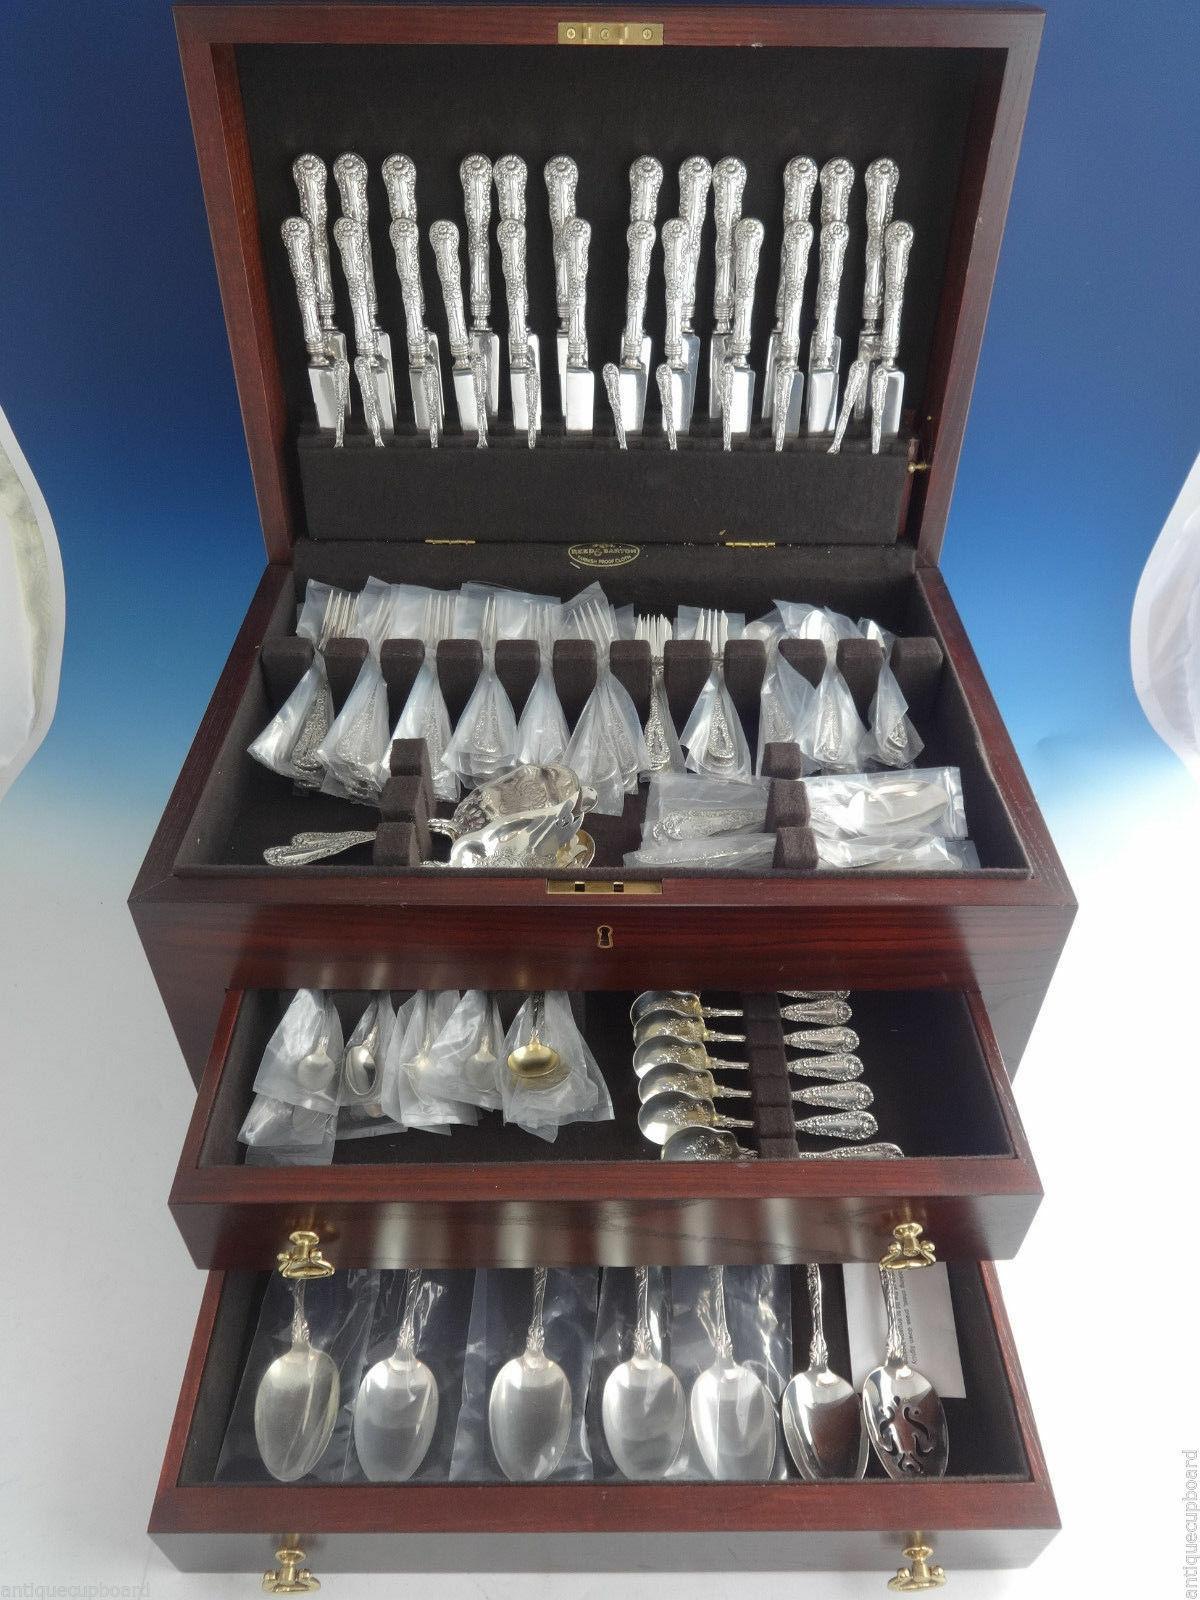 Exceptional monumental Number 10 Ten by Dominick & Haff sterling silver Dinner Size Flatware set, 126 Pieces. This set includes:

12 Dinner knives, 9 7/8